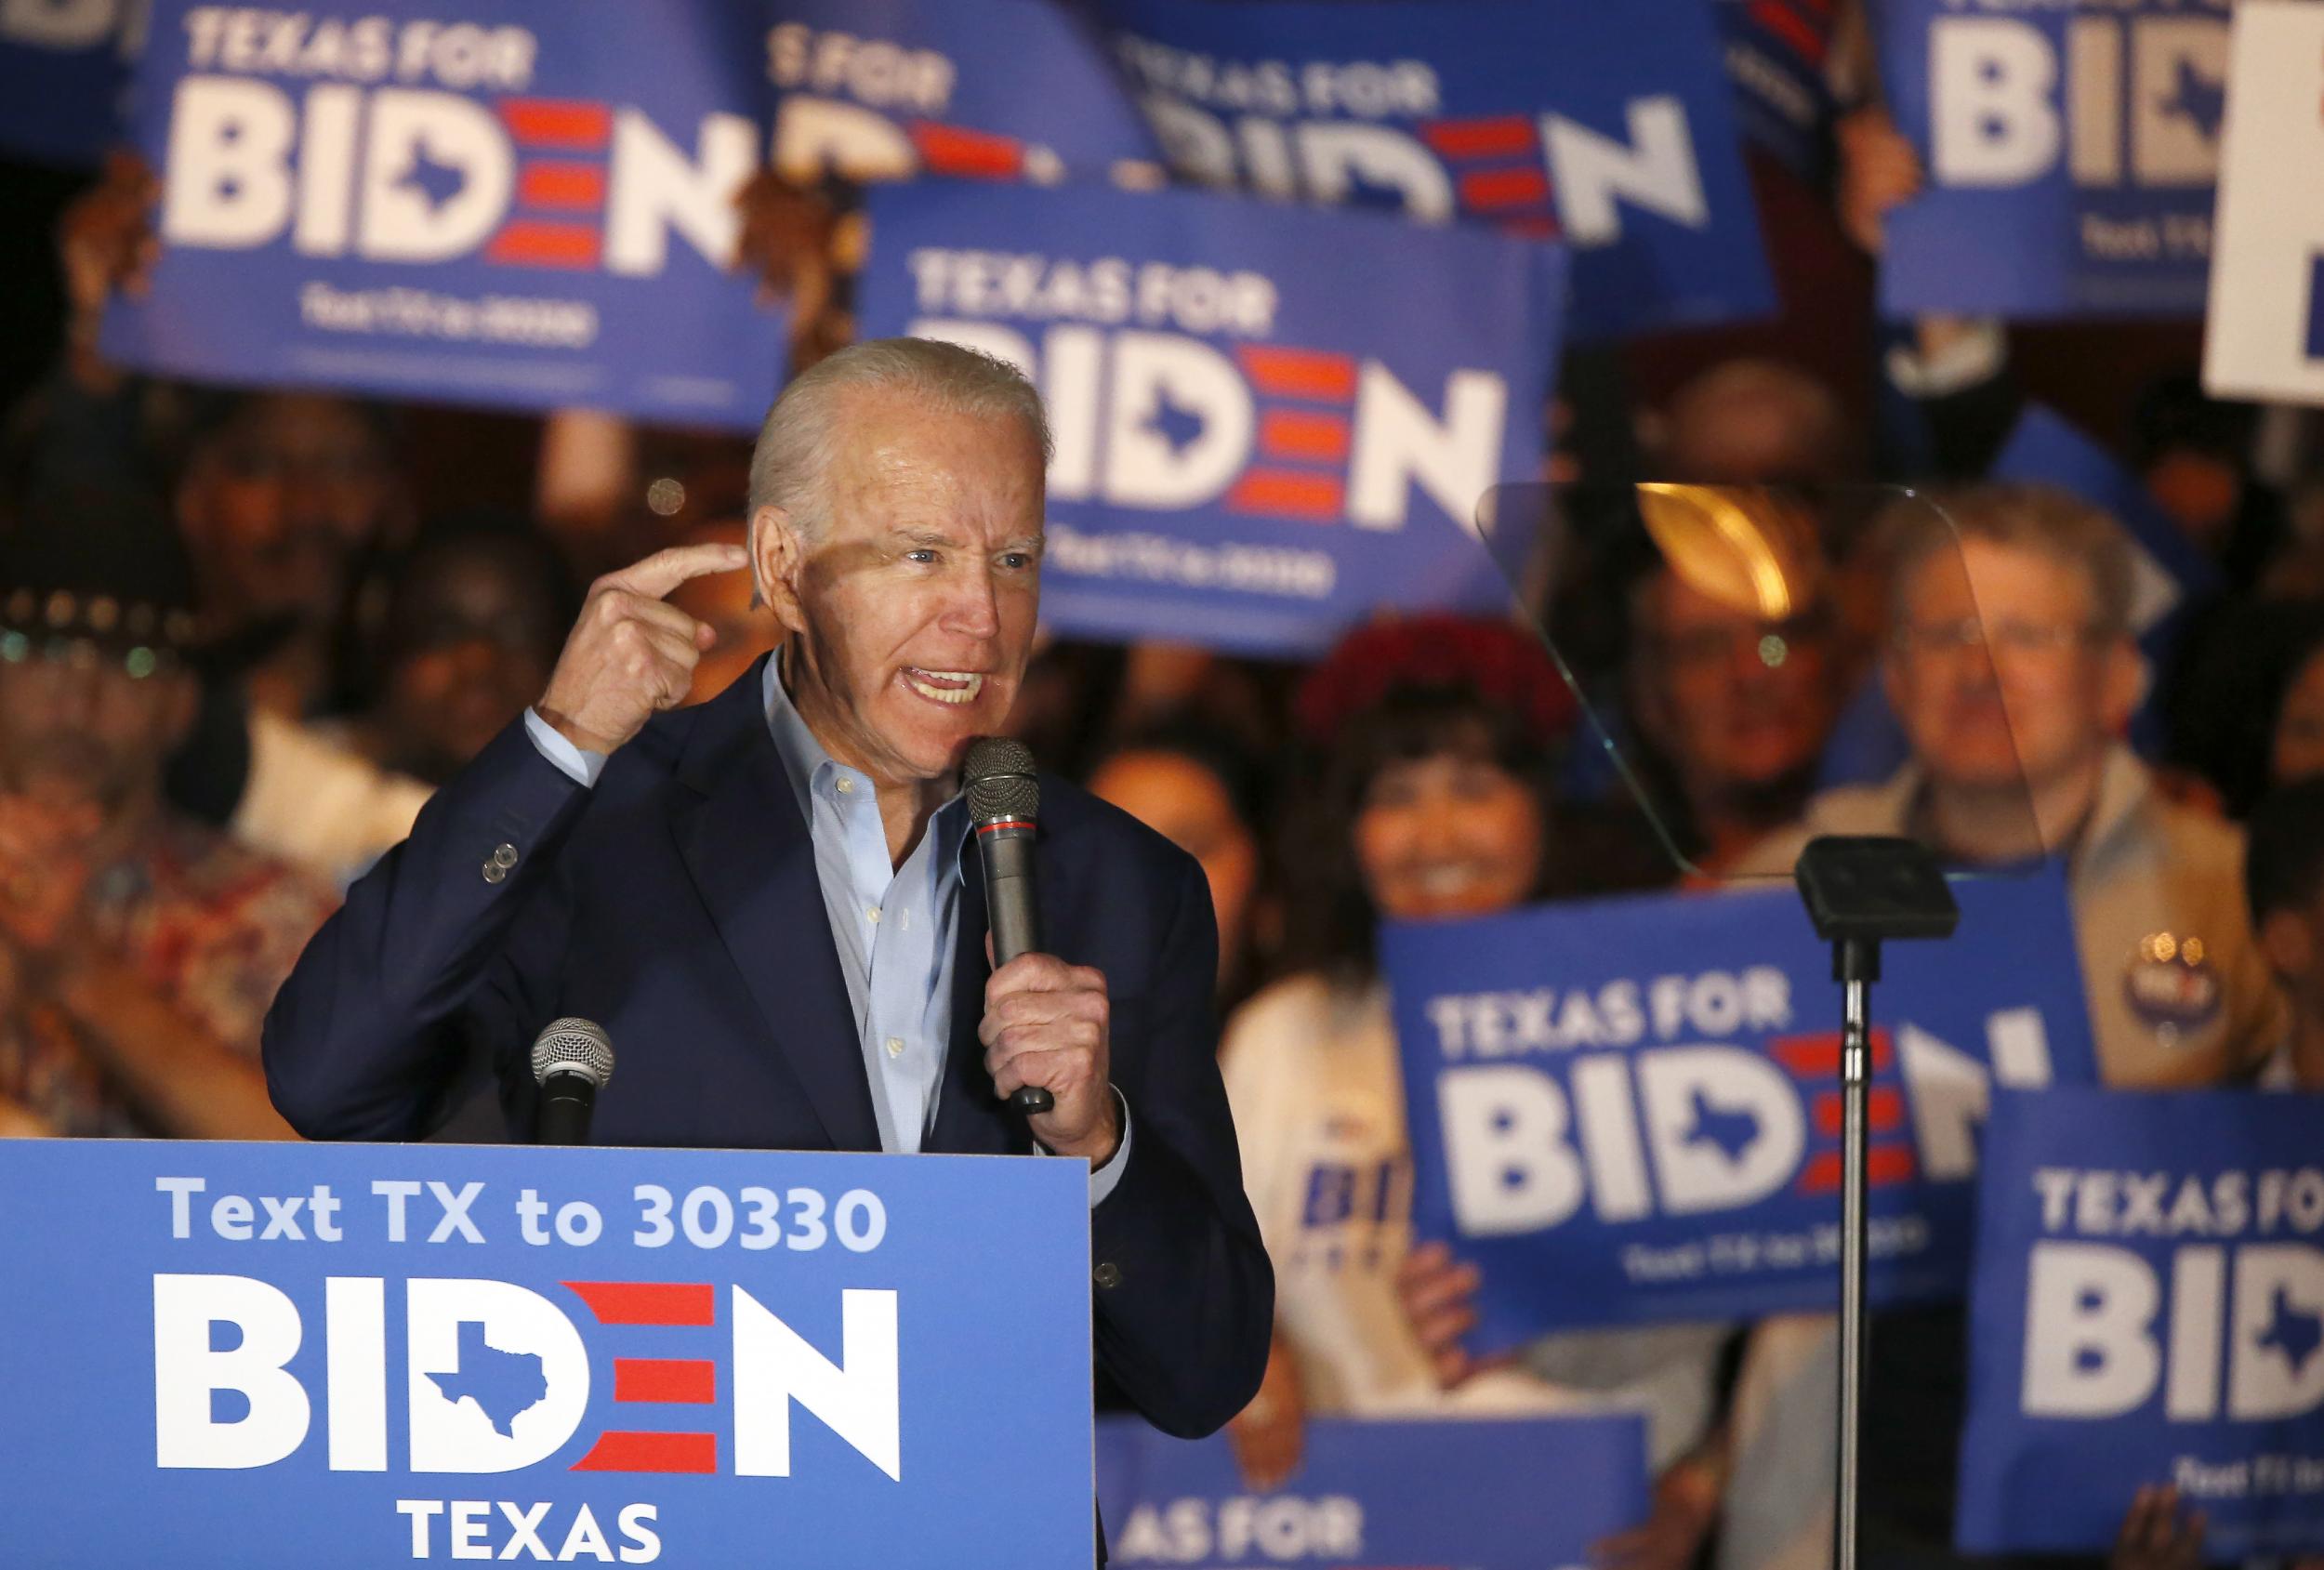 Can Biden turn the Lone Star state blue in 2020?